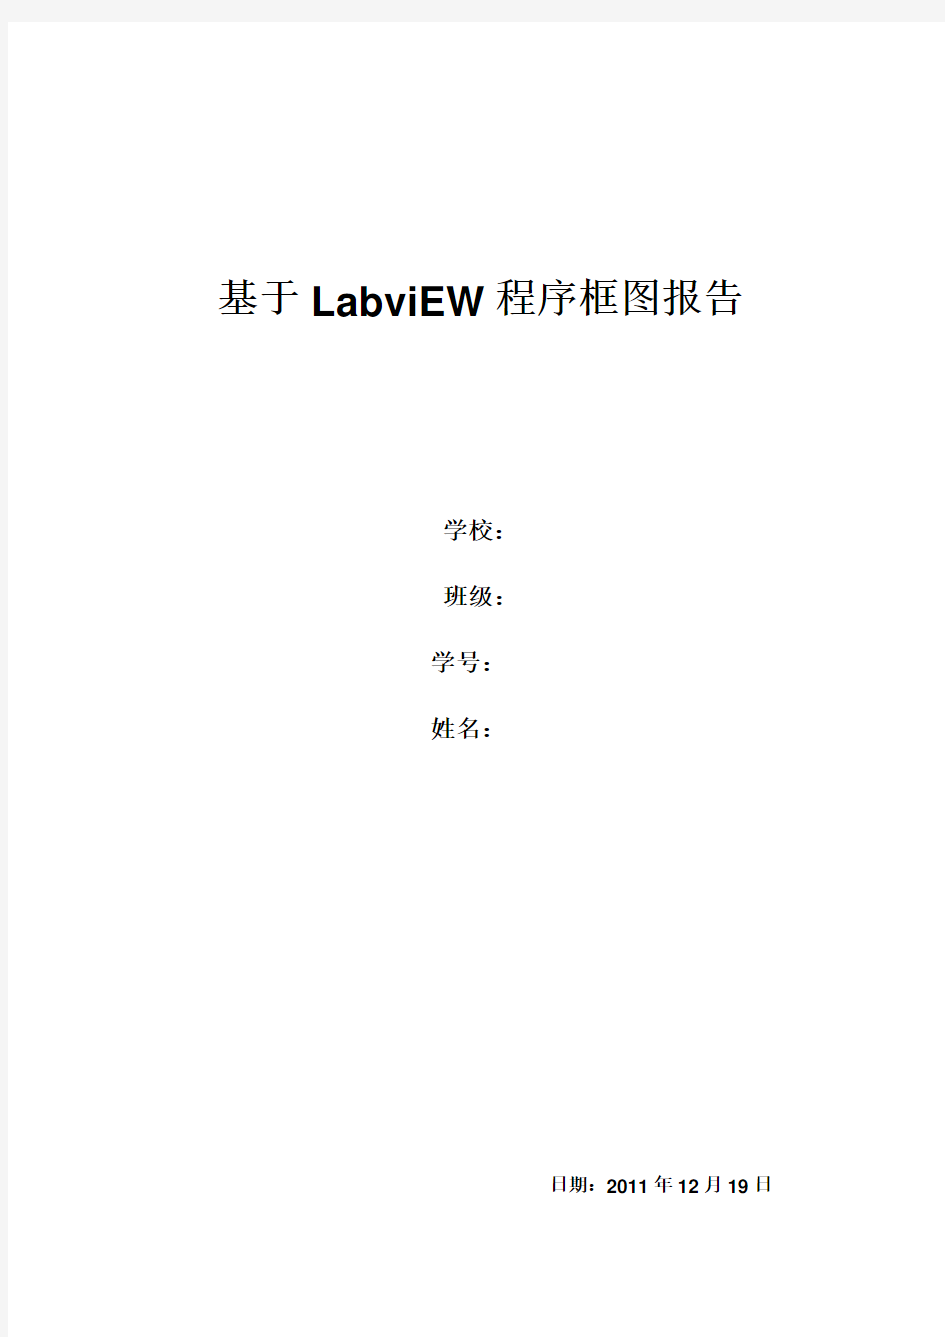 LabvieW程序框图报告